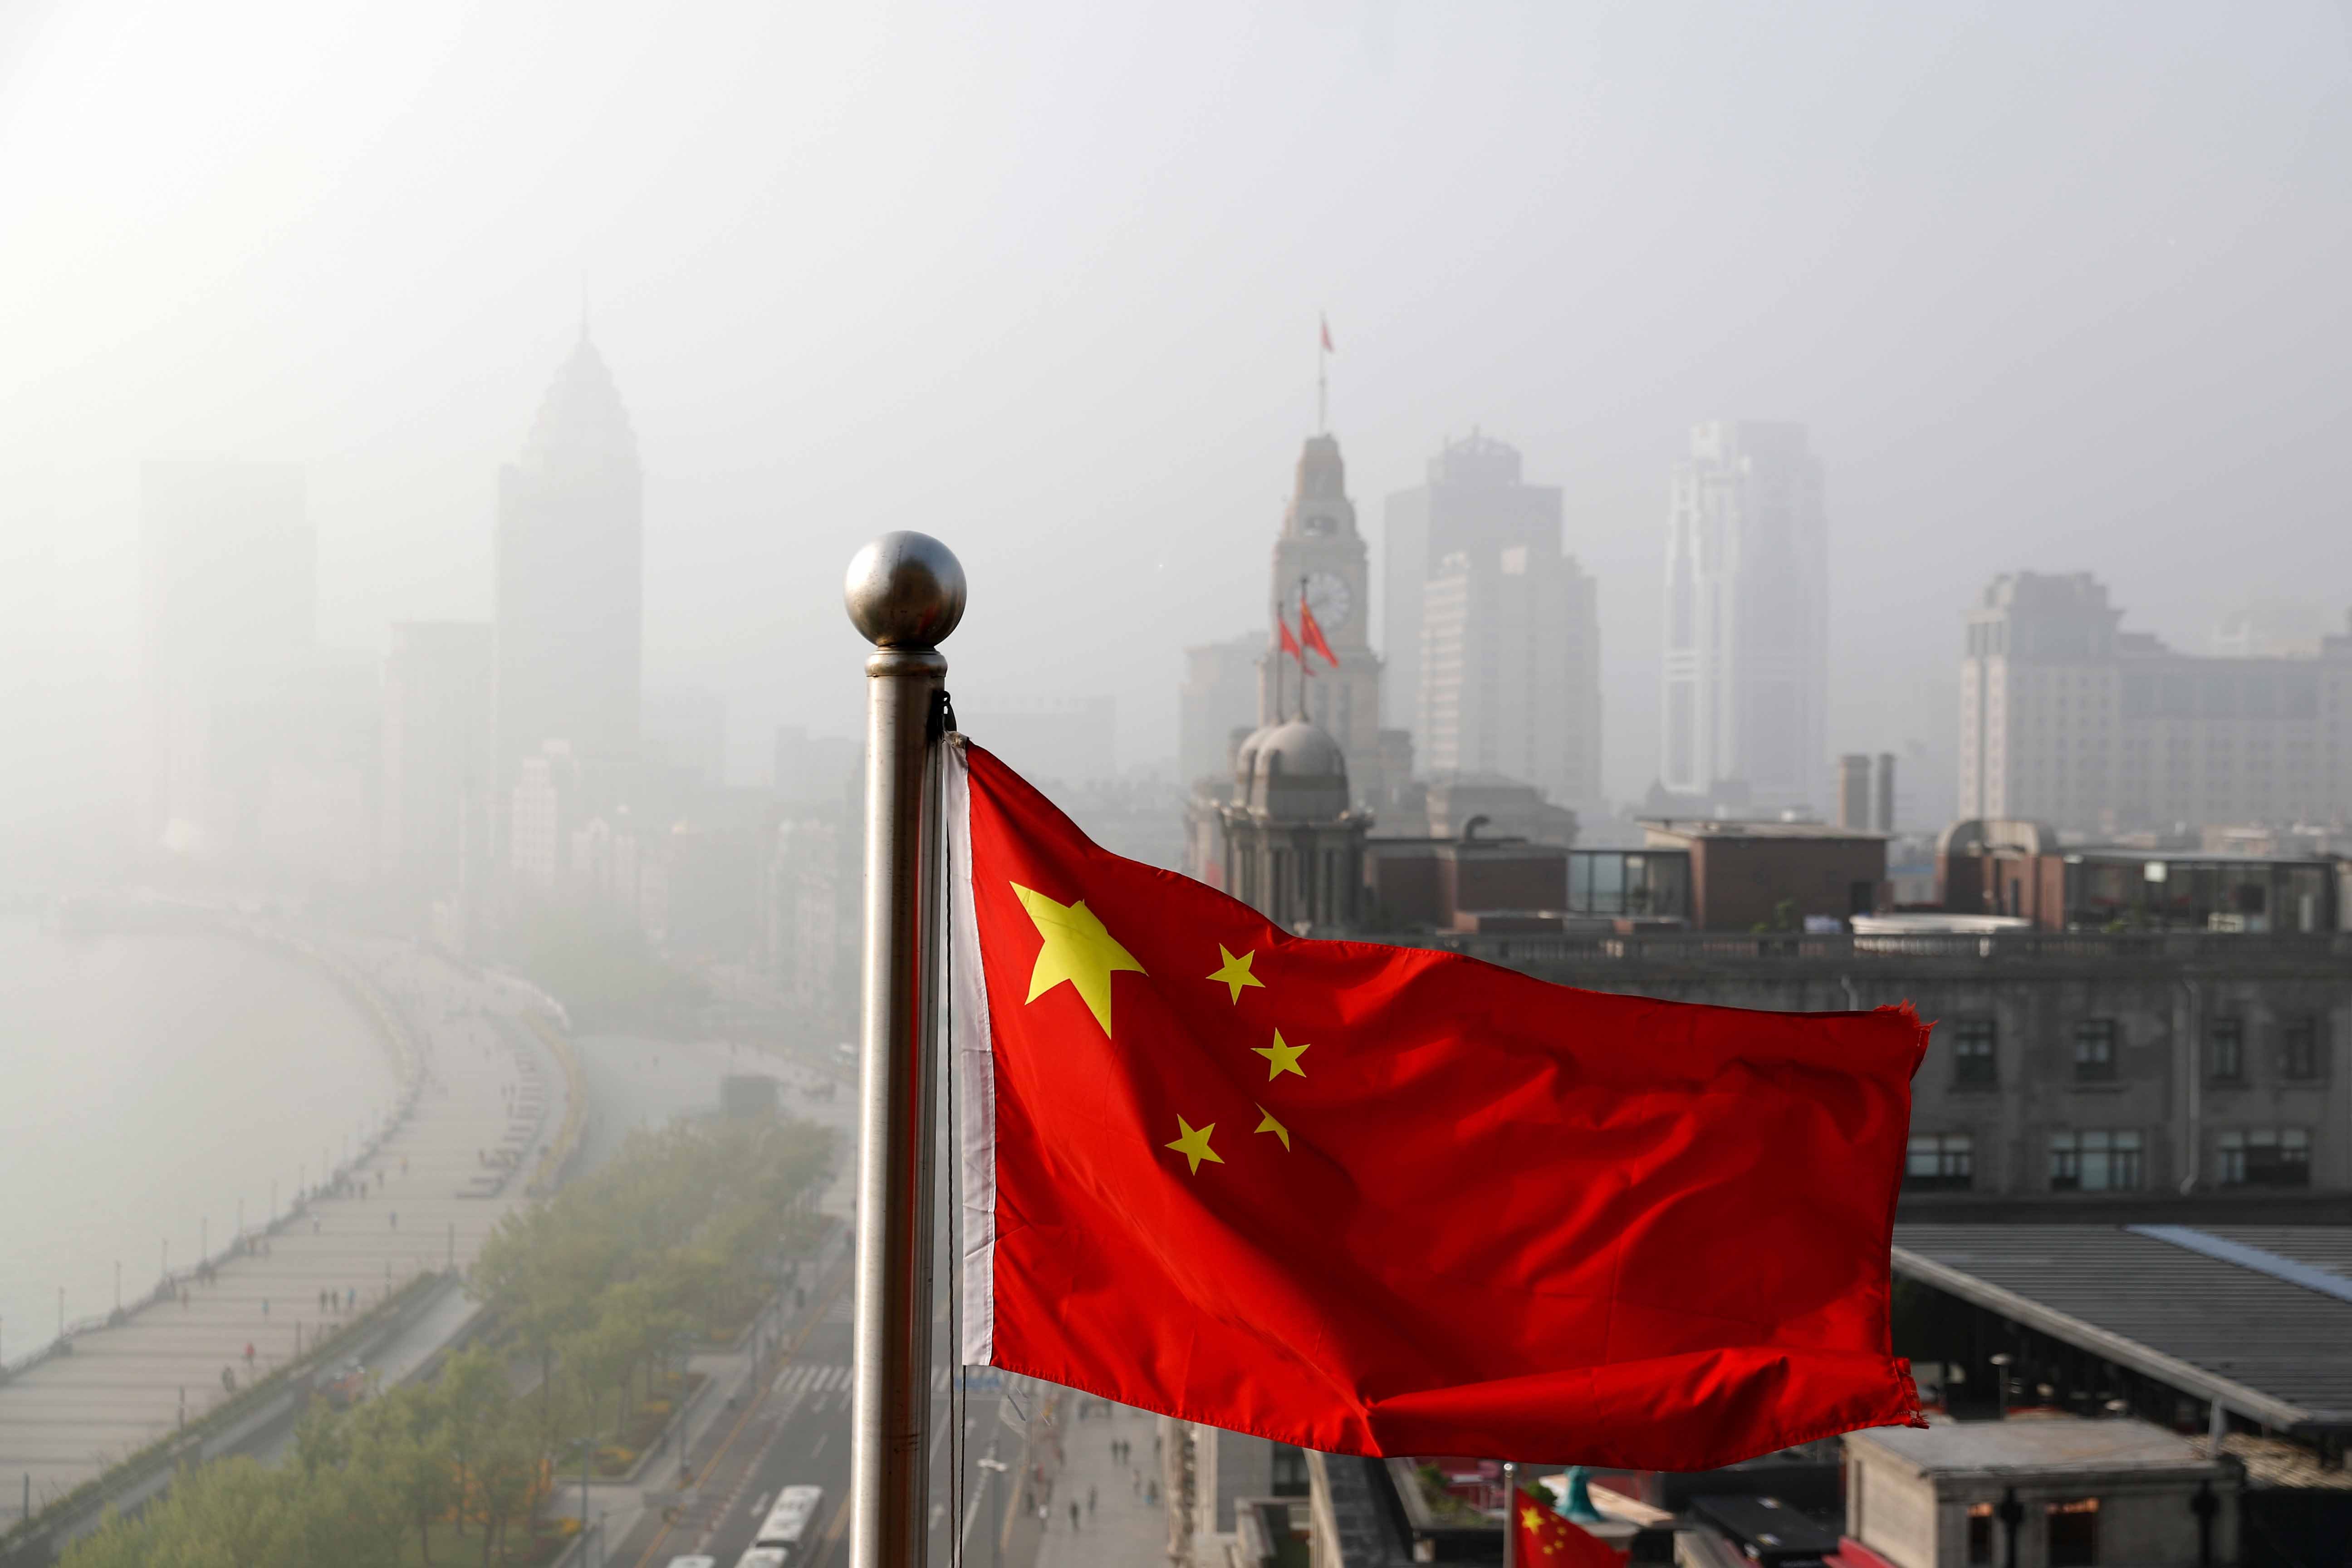 Financial Times editorial board warns China must reform or risk losing foreign investment